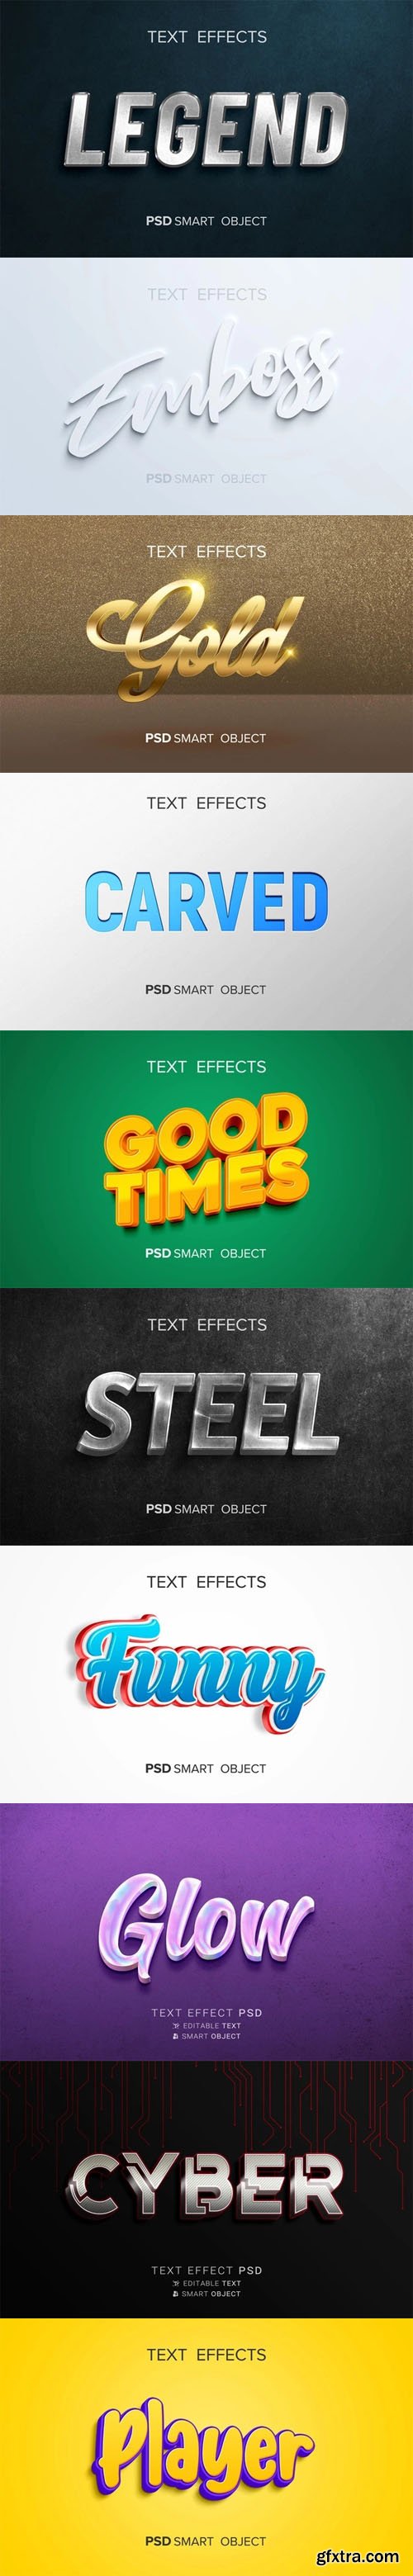 10 Creative Photoshop Text Effects